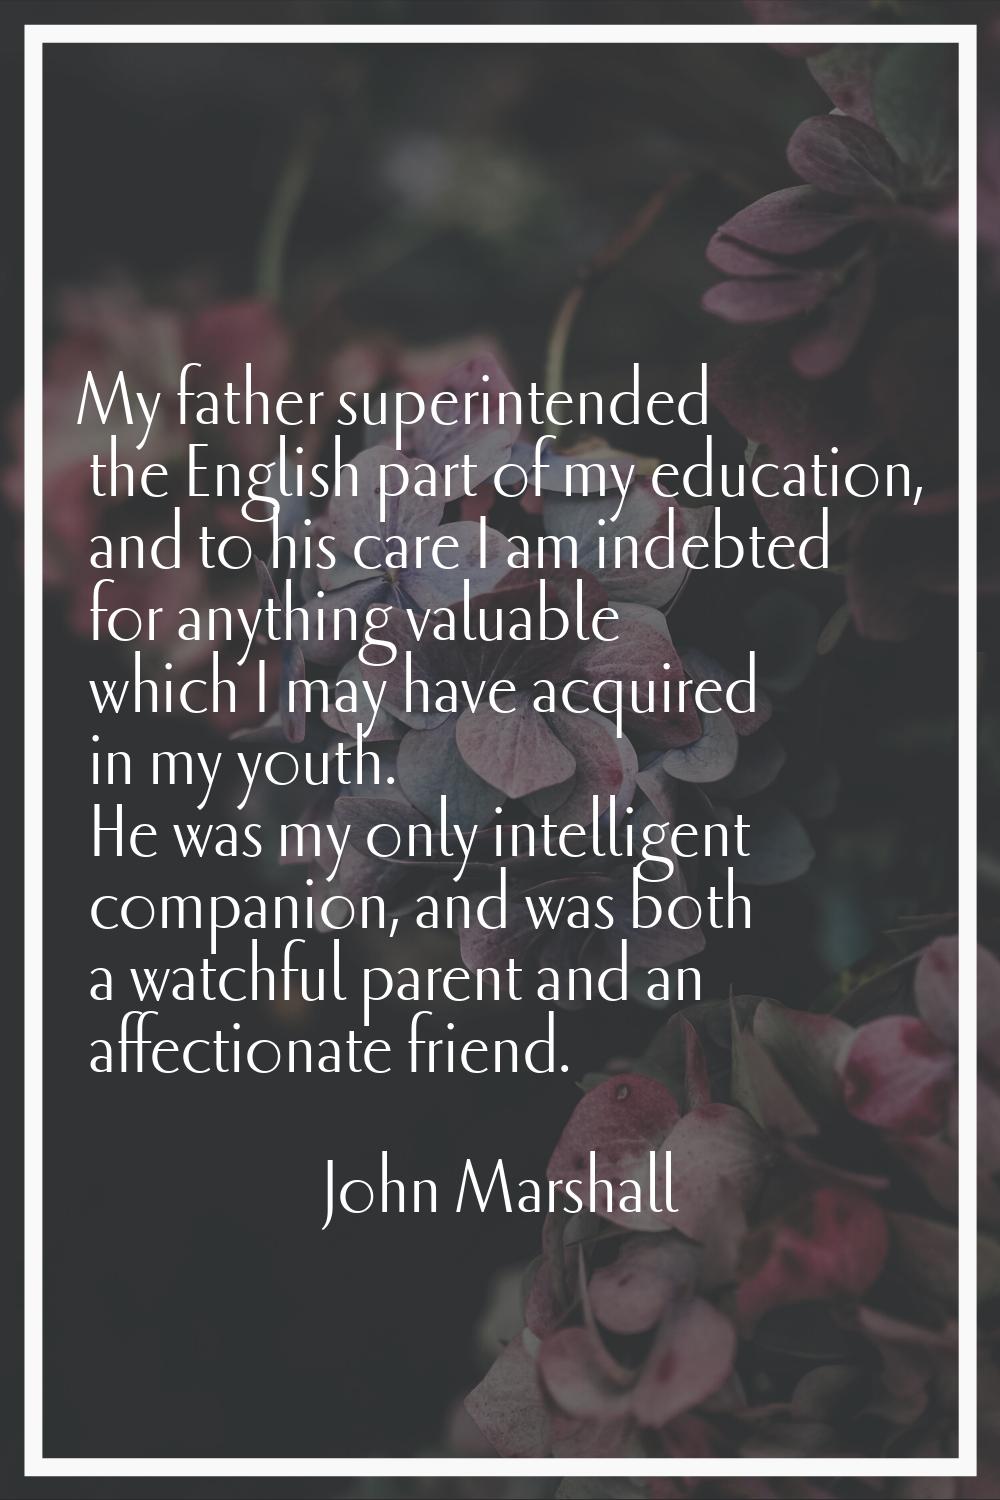 My father superintended the English part of my education, and to his care I am indebted for anythin